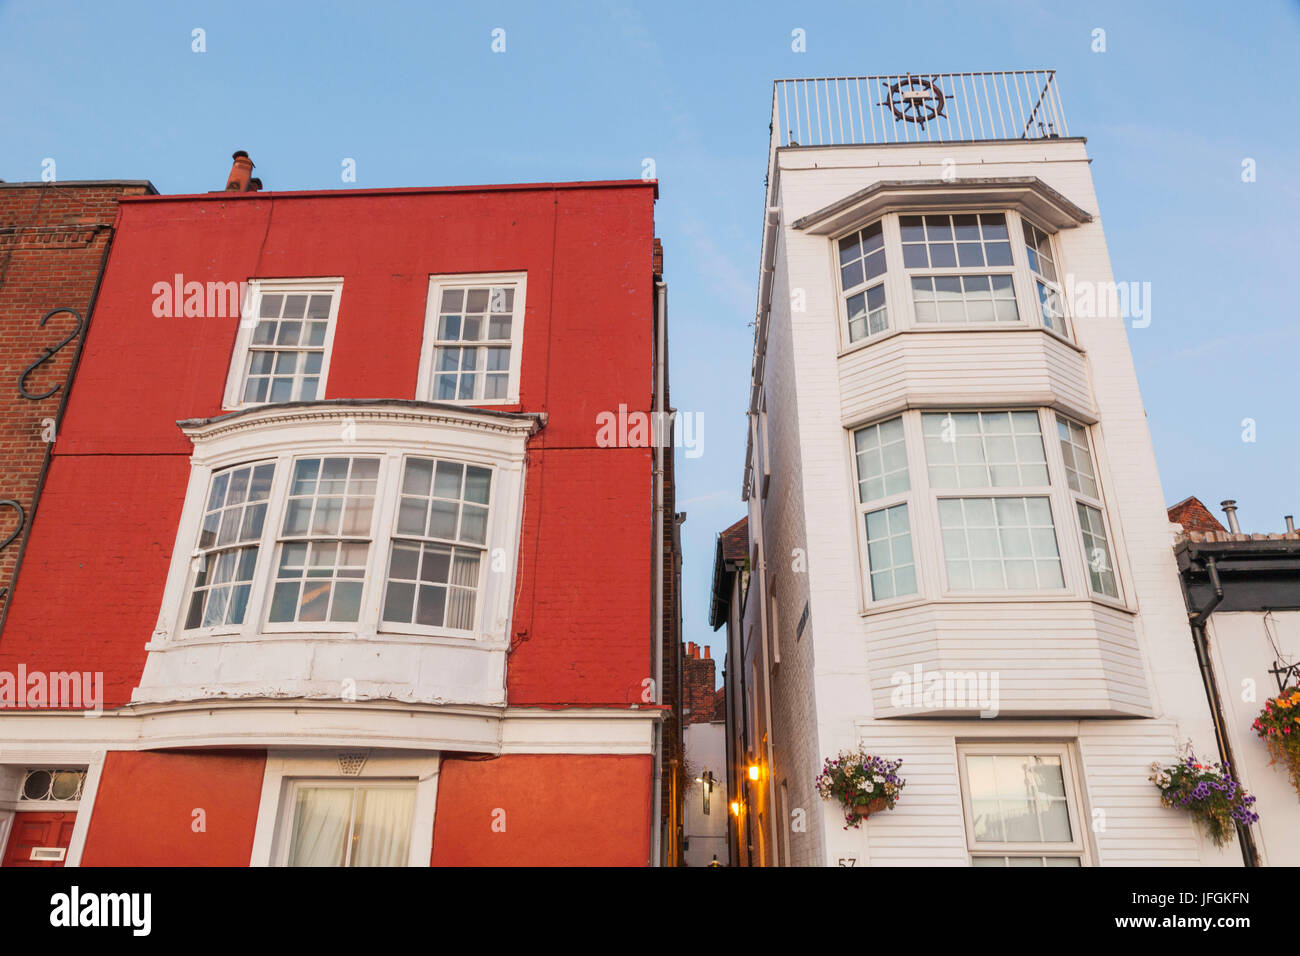 England, Hampshire, Portsmouth, Facade of Historical Houses in Old Portsmouth Stock Photo